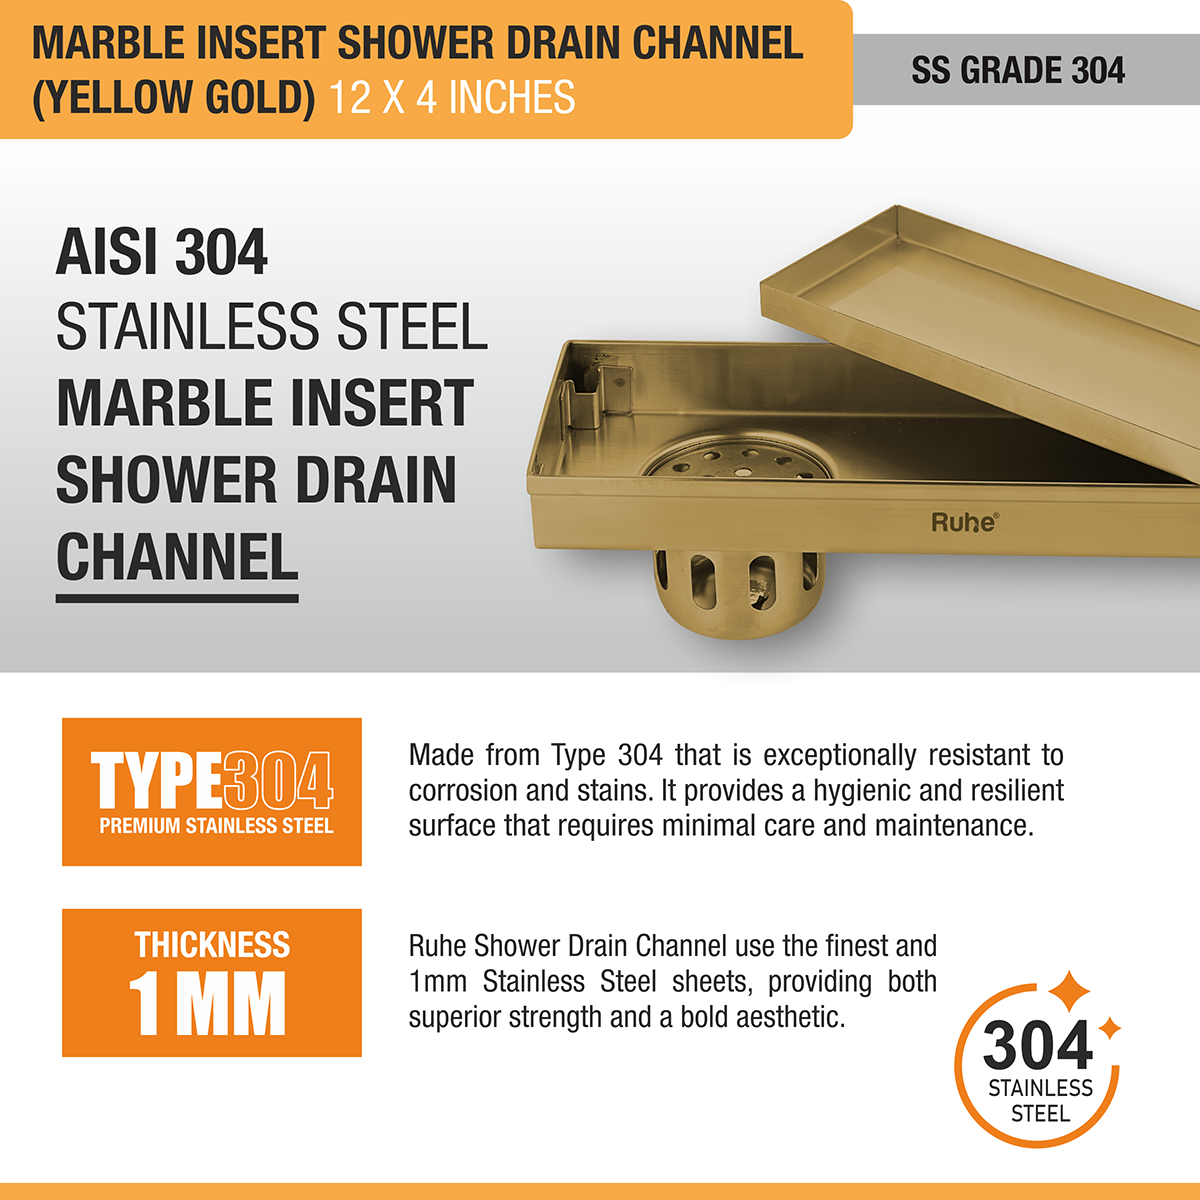 Marble Insert Shower Drain Channel (12 x 4 Inches) YELLOW GOLD PVD Coated stainless steel